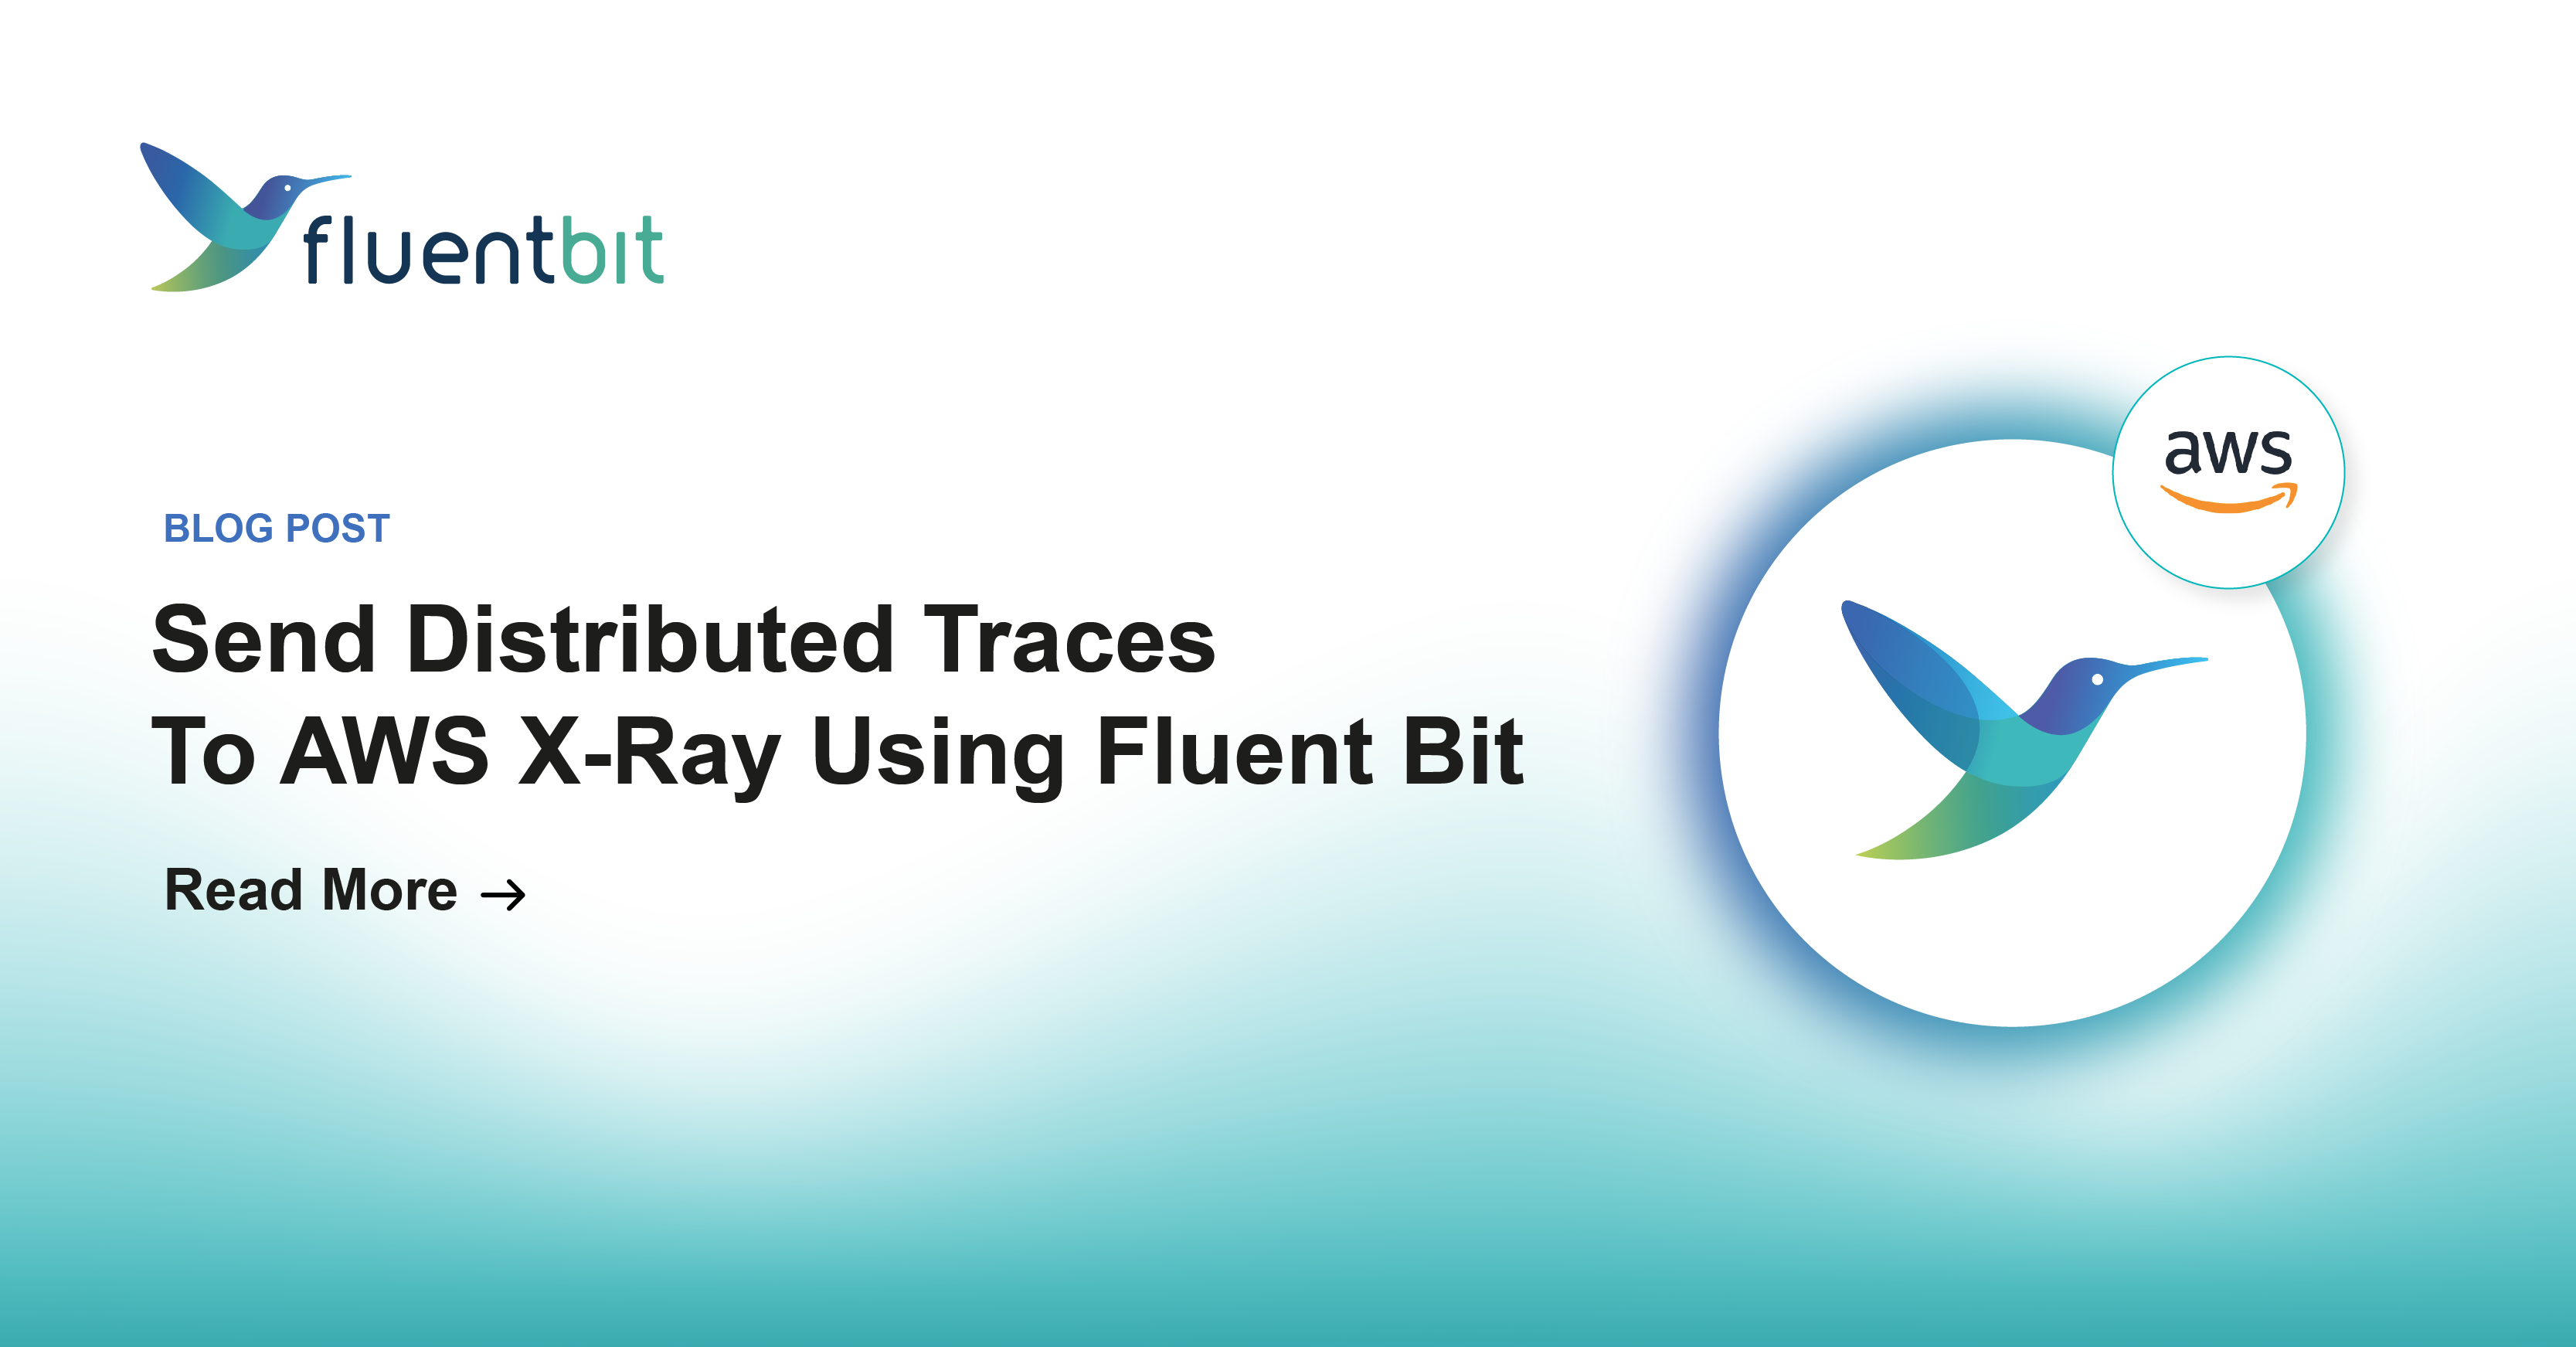 Send Distributed Traces To AWS X-Ray Using Fluent Bit